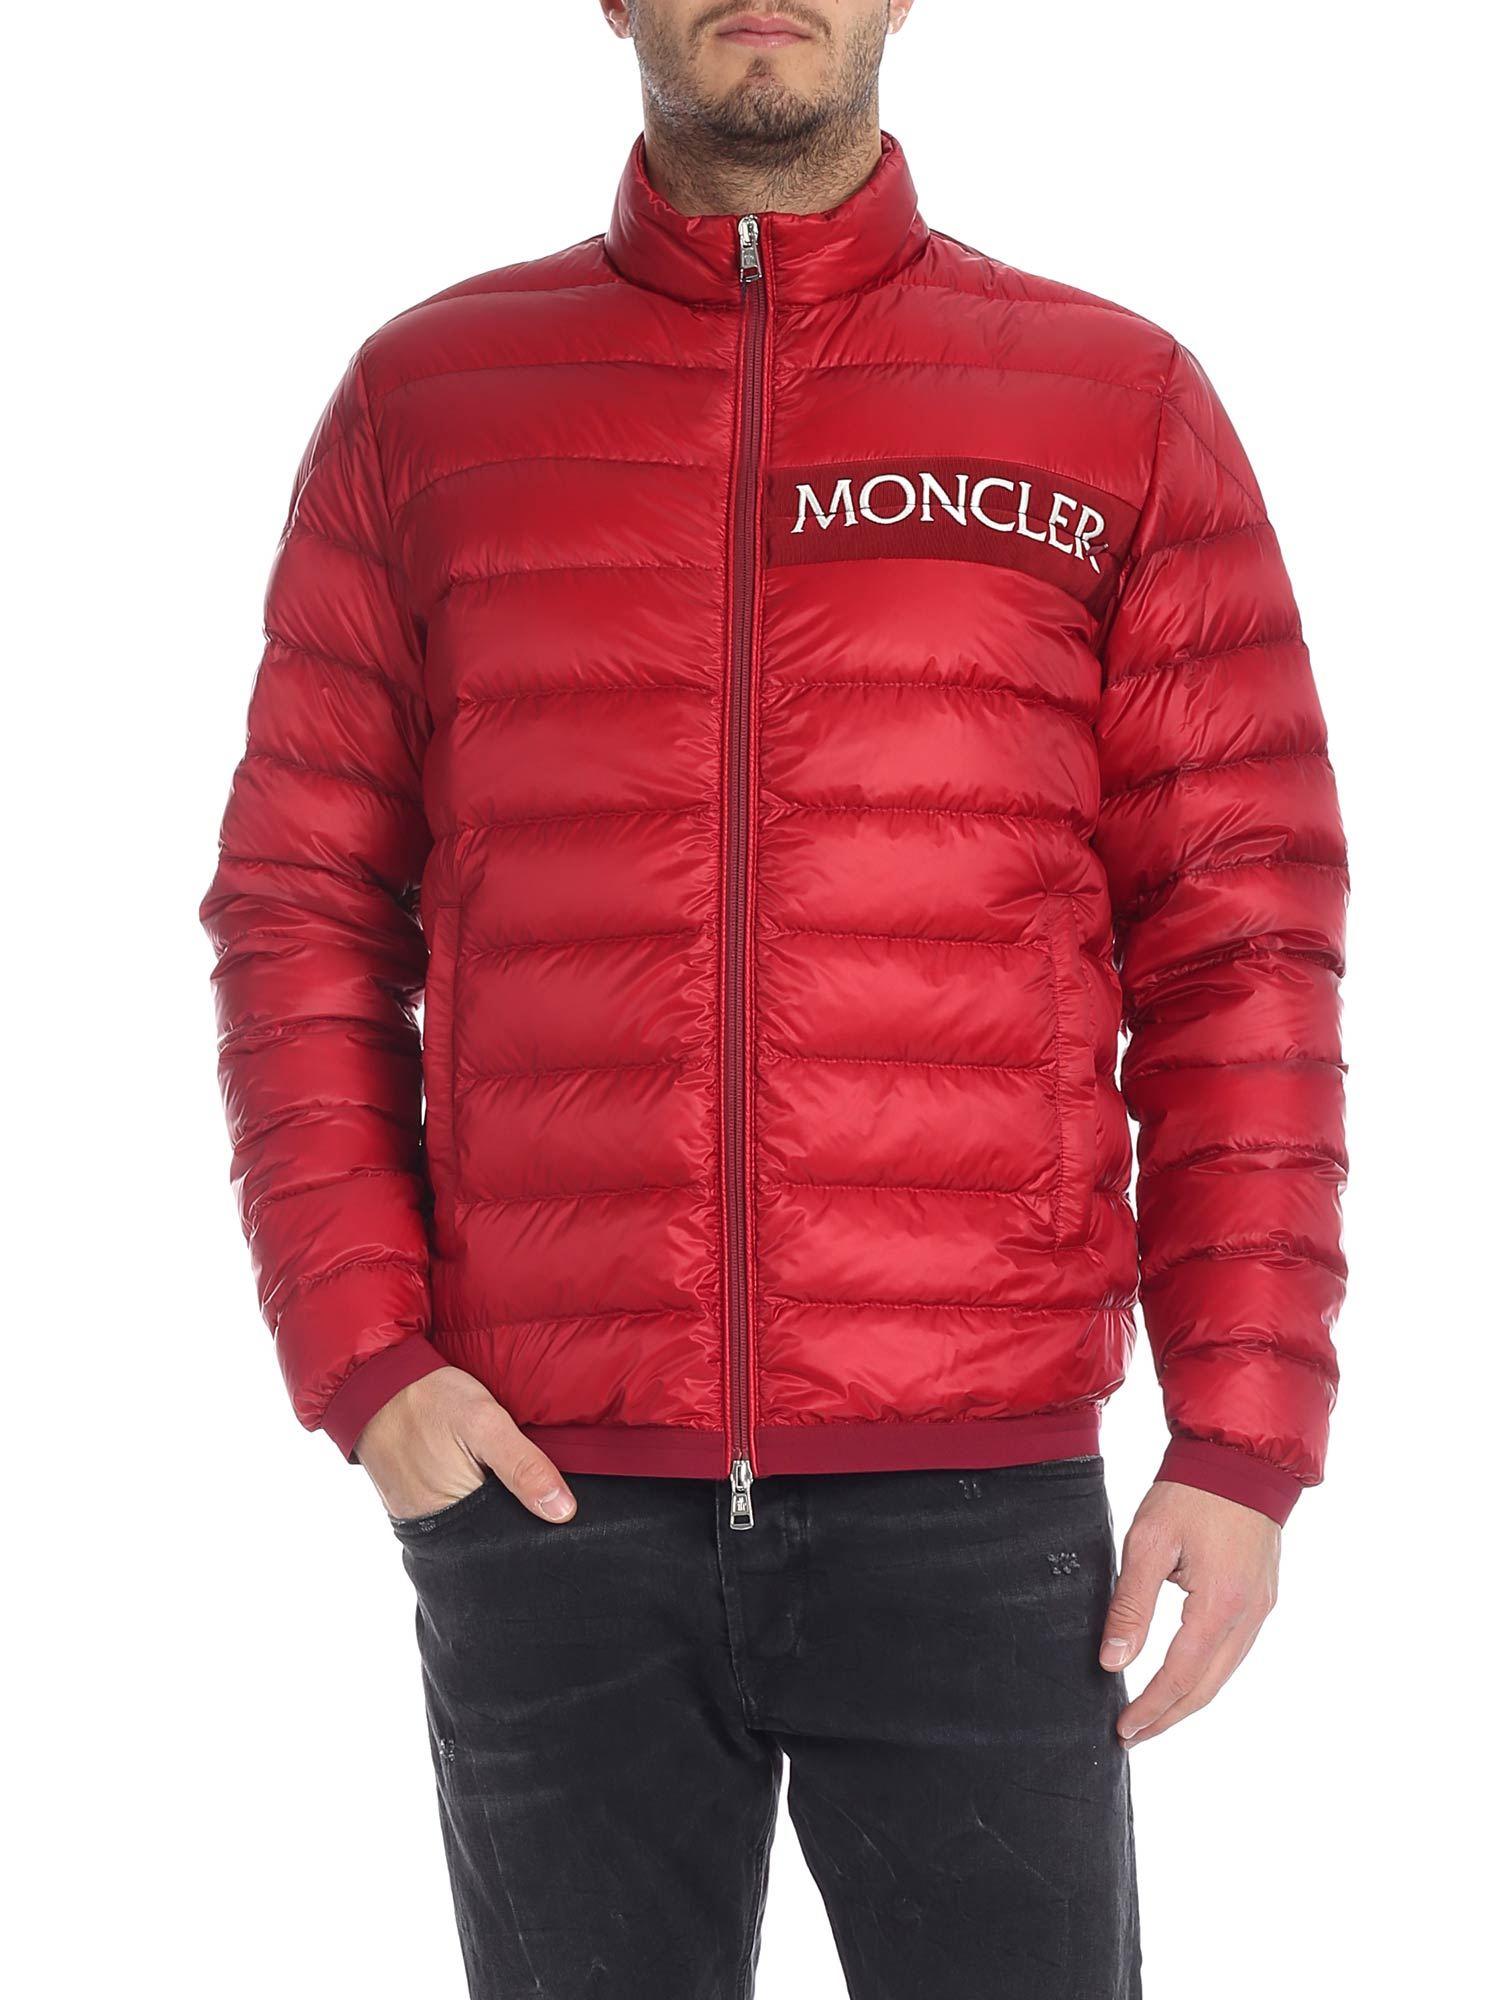 Moncler Neveu Down Jacket In Red for Men - Lyst